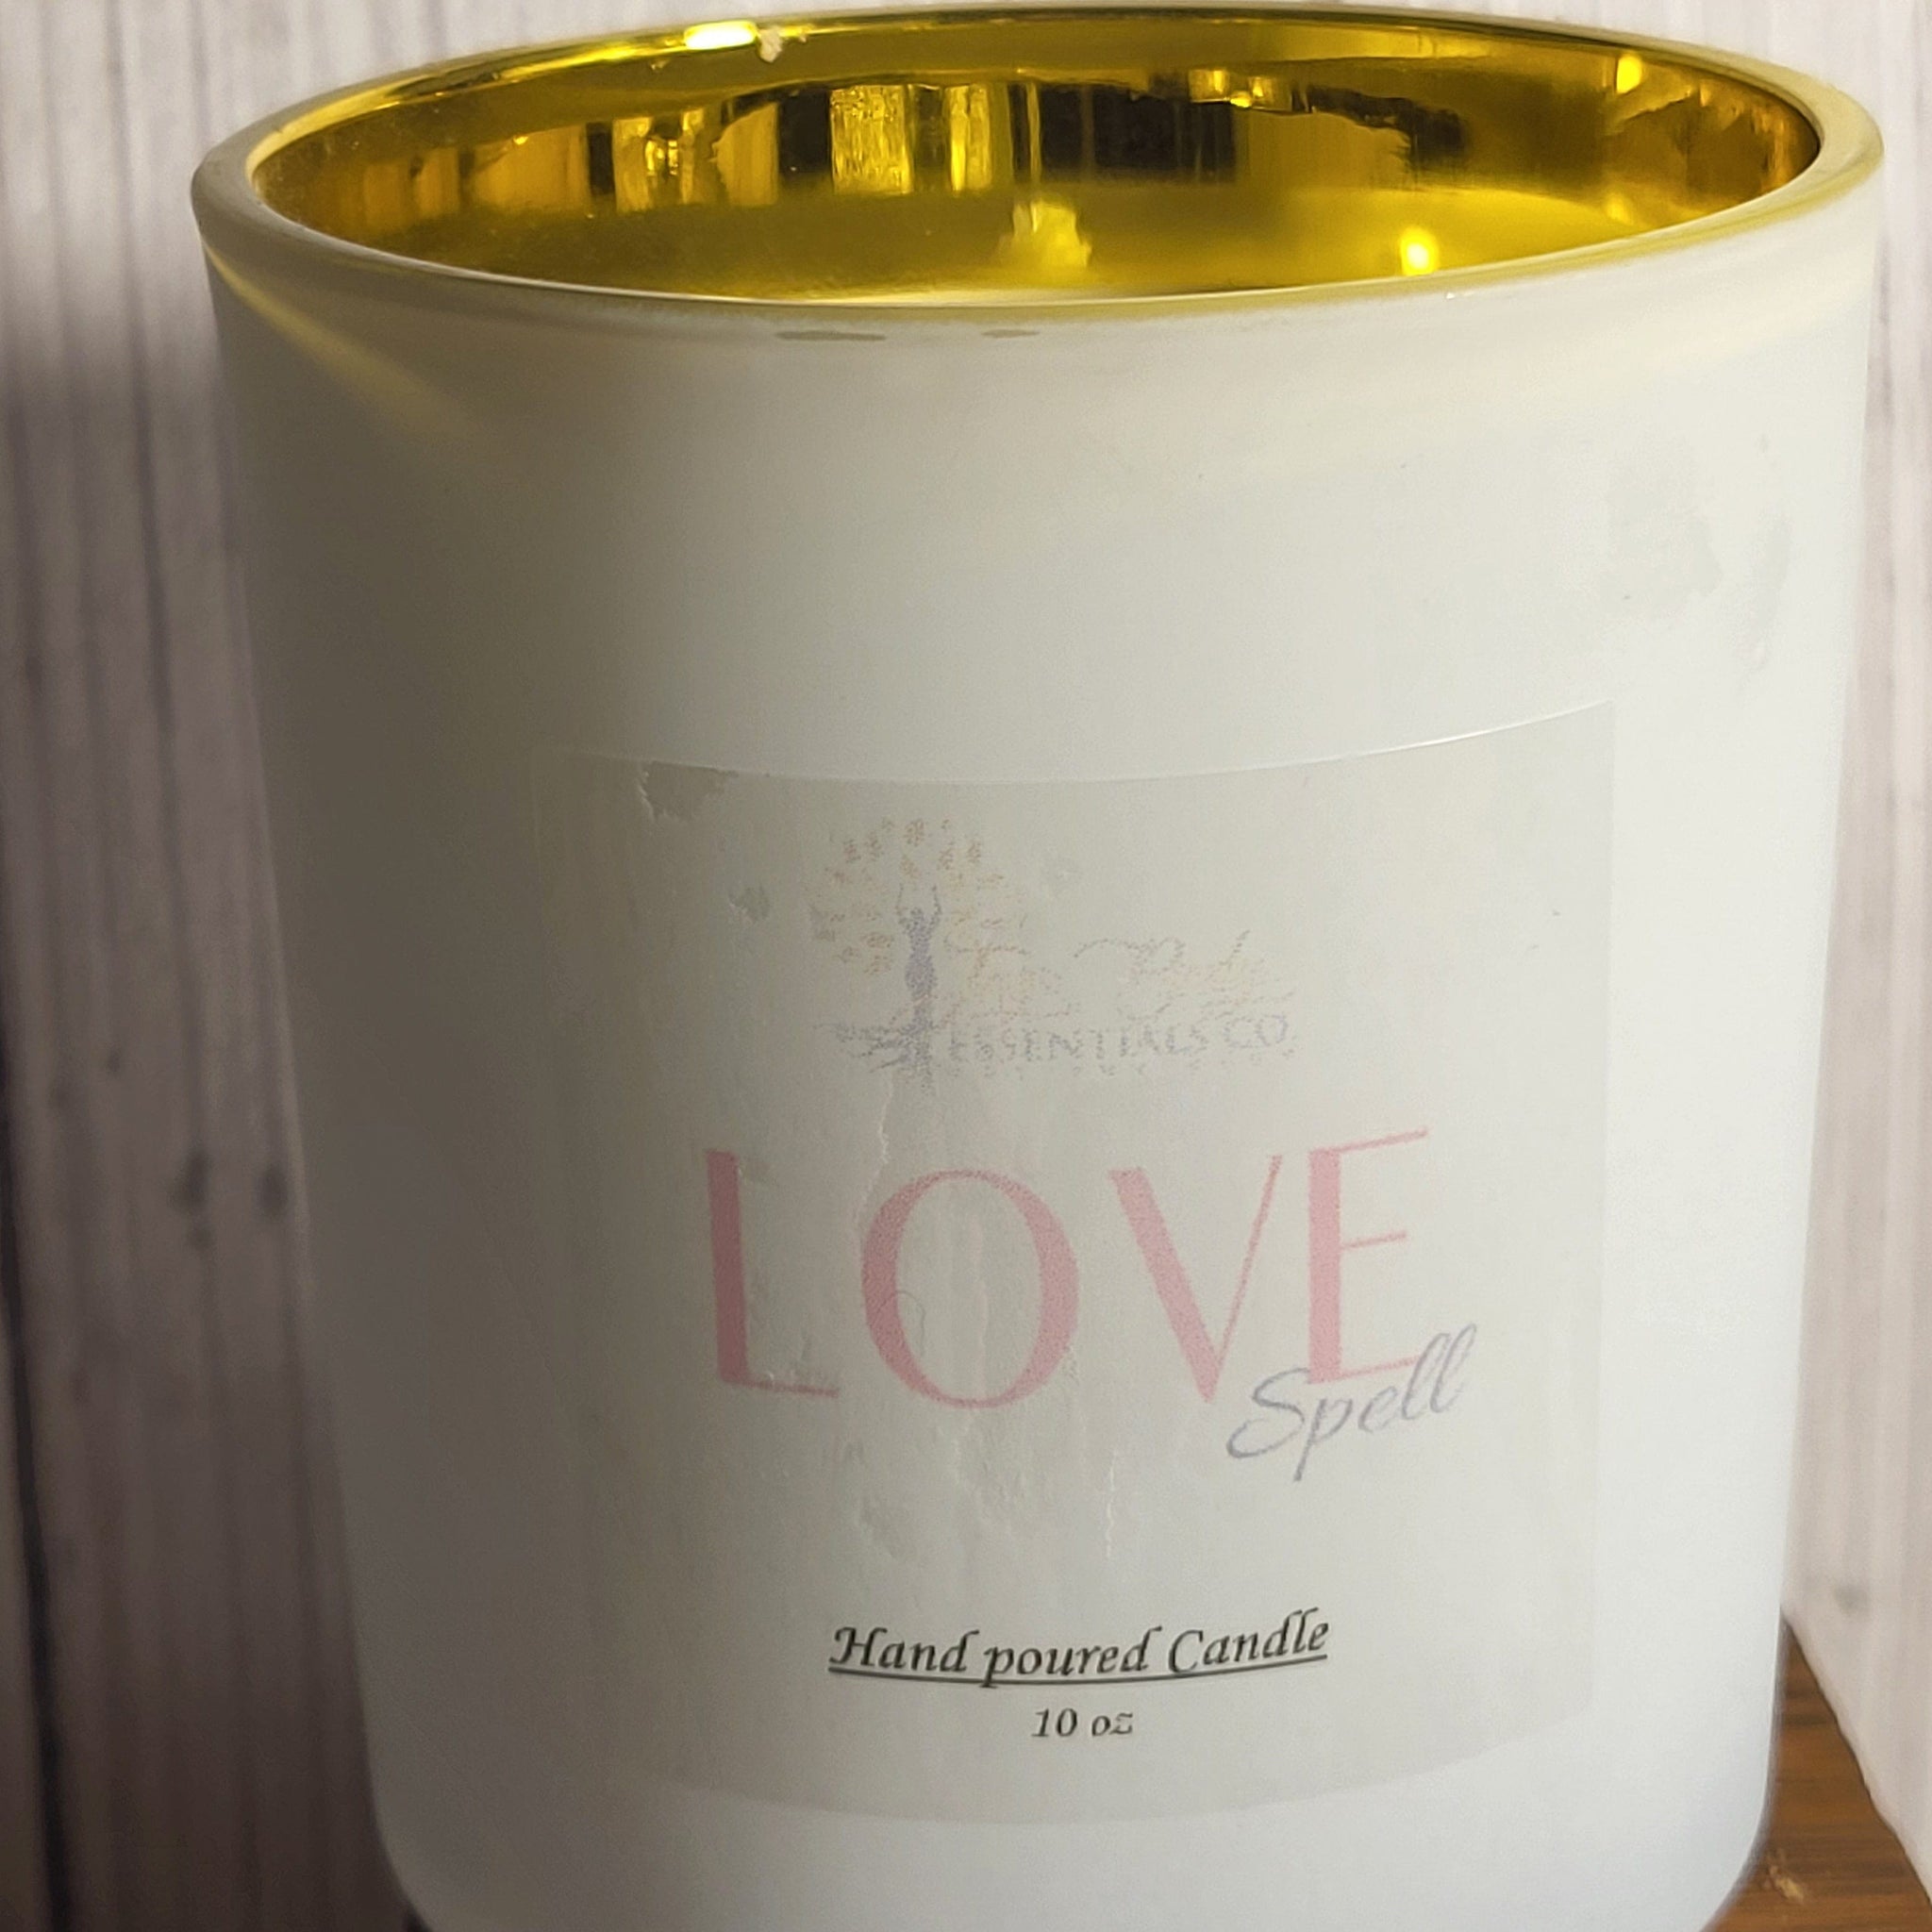 The Love Spell Lux Candle